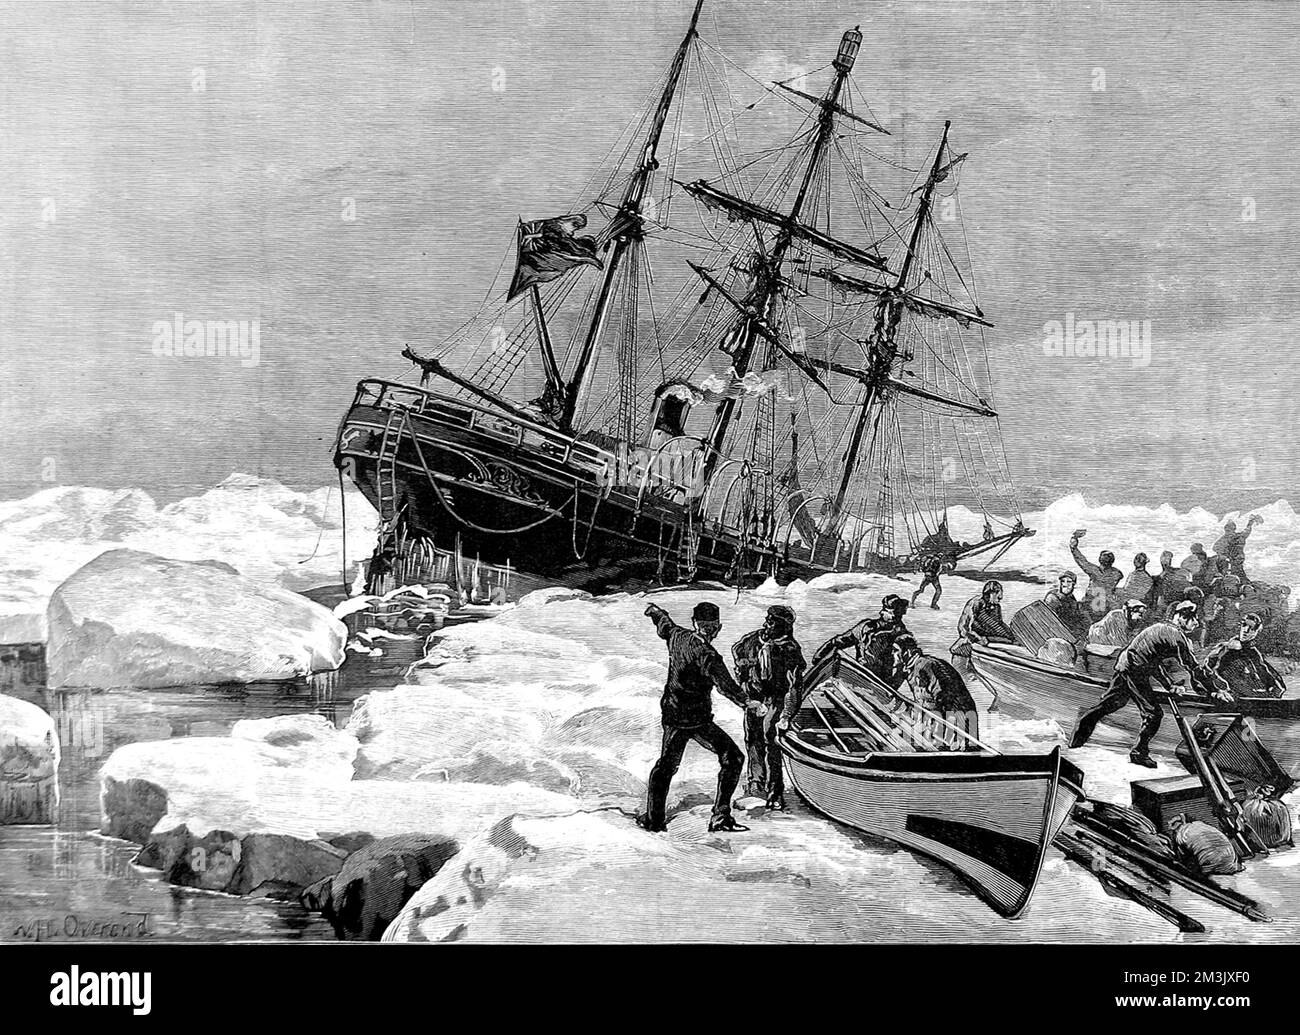 The yacht 'Eira', commanded by Benjamin Leigh Smith, crushed by the ice and sinking off Cape Flora, Franz Joseph Land, 21st August 1881.  Following the sinking the crew endured an epic journey to safety, dragging the ship's boats over ice for six weeks and sailing through a strong gale to try to reach Nova Zembla. They were rescued by Sir Allen Young in the ship 'Hope' at Matotchkin Strait, August 1882. Stock Photo